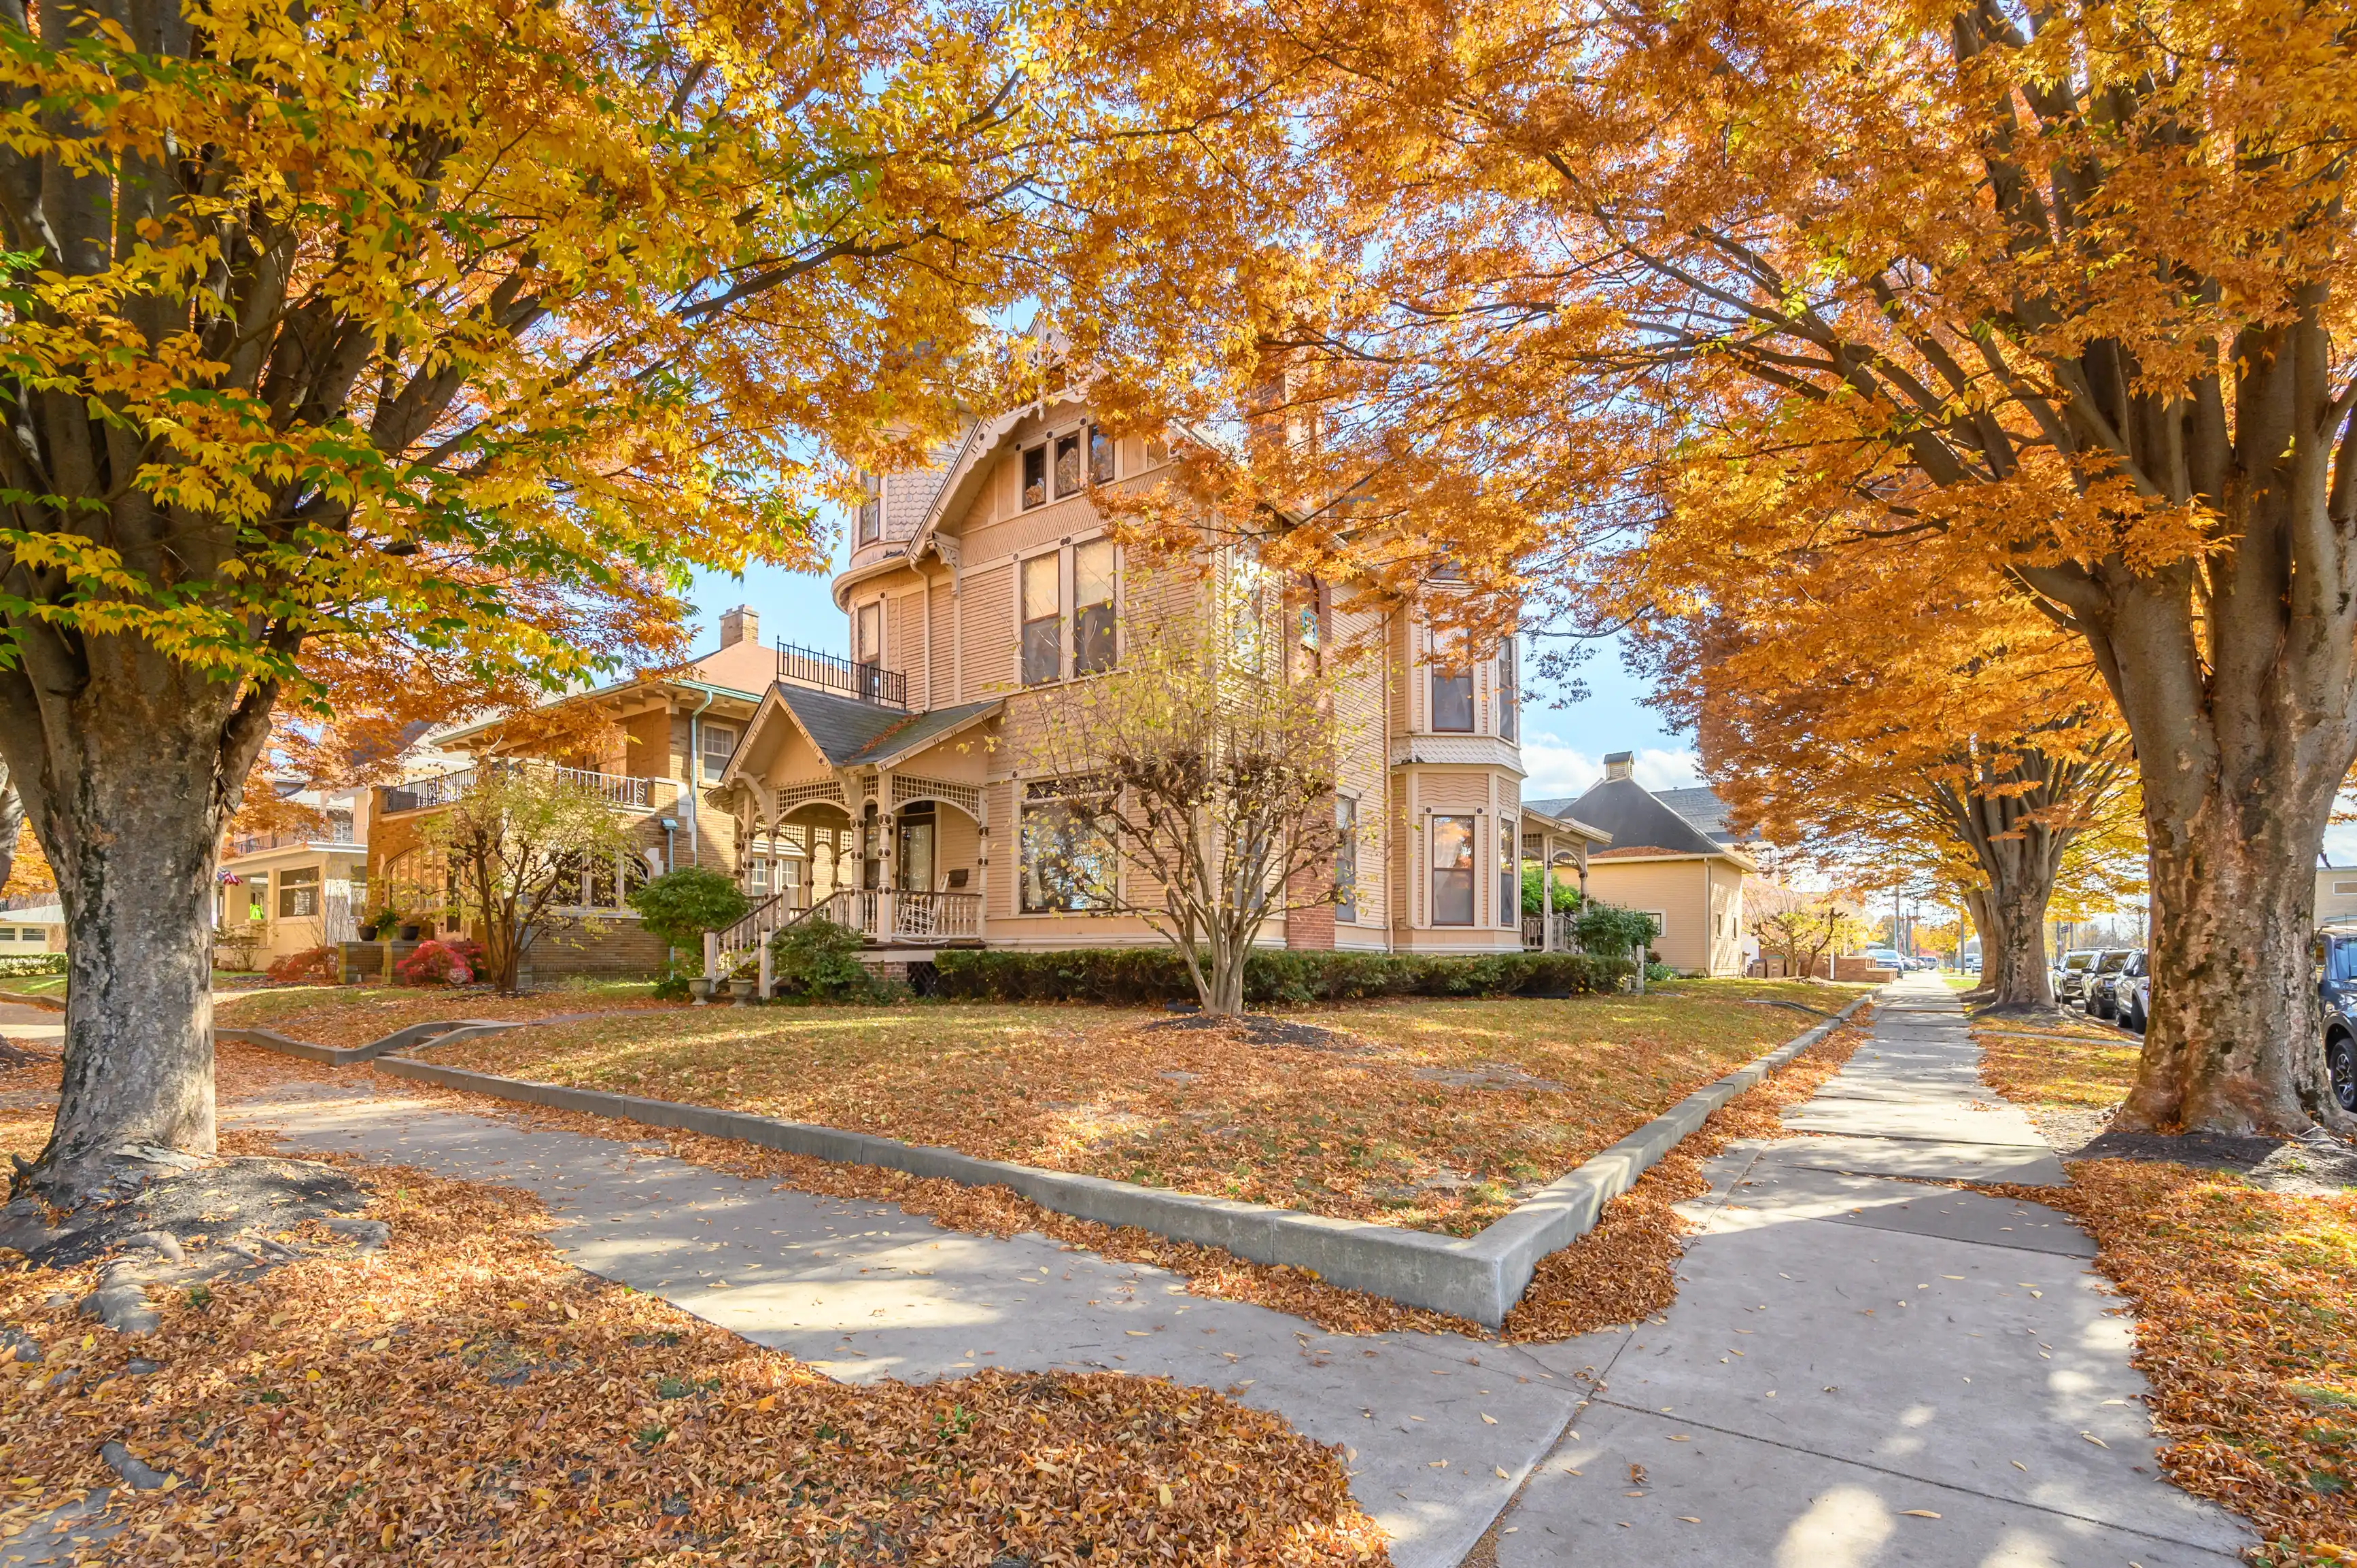 Victorian-style house with a gabled roof surrounded by autumn-colored trees on a sunny day.